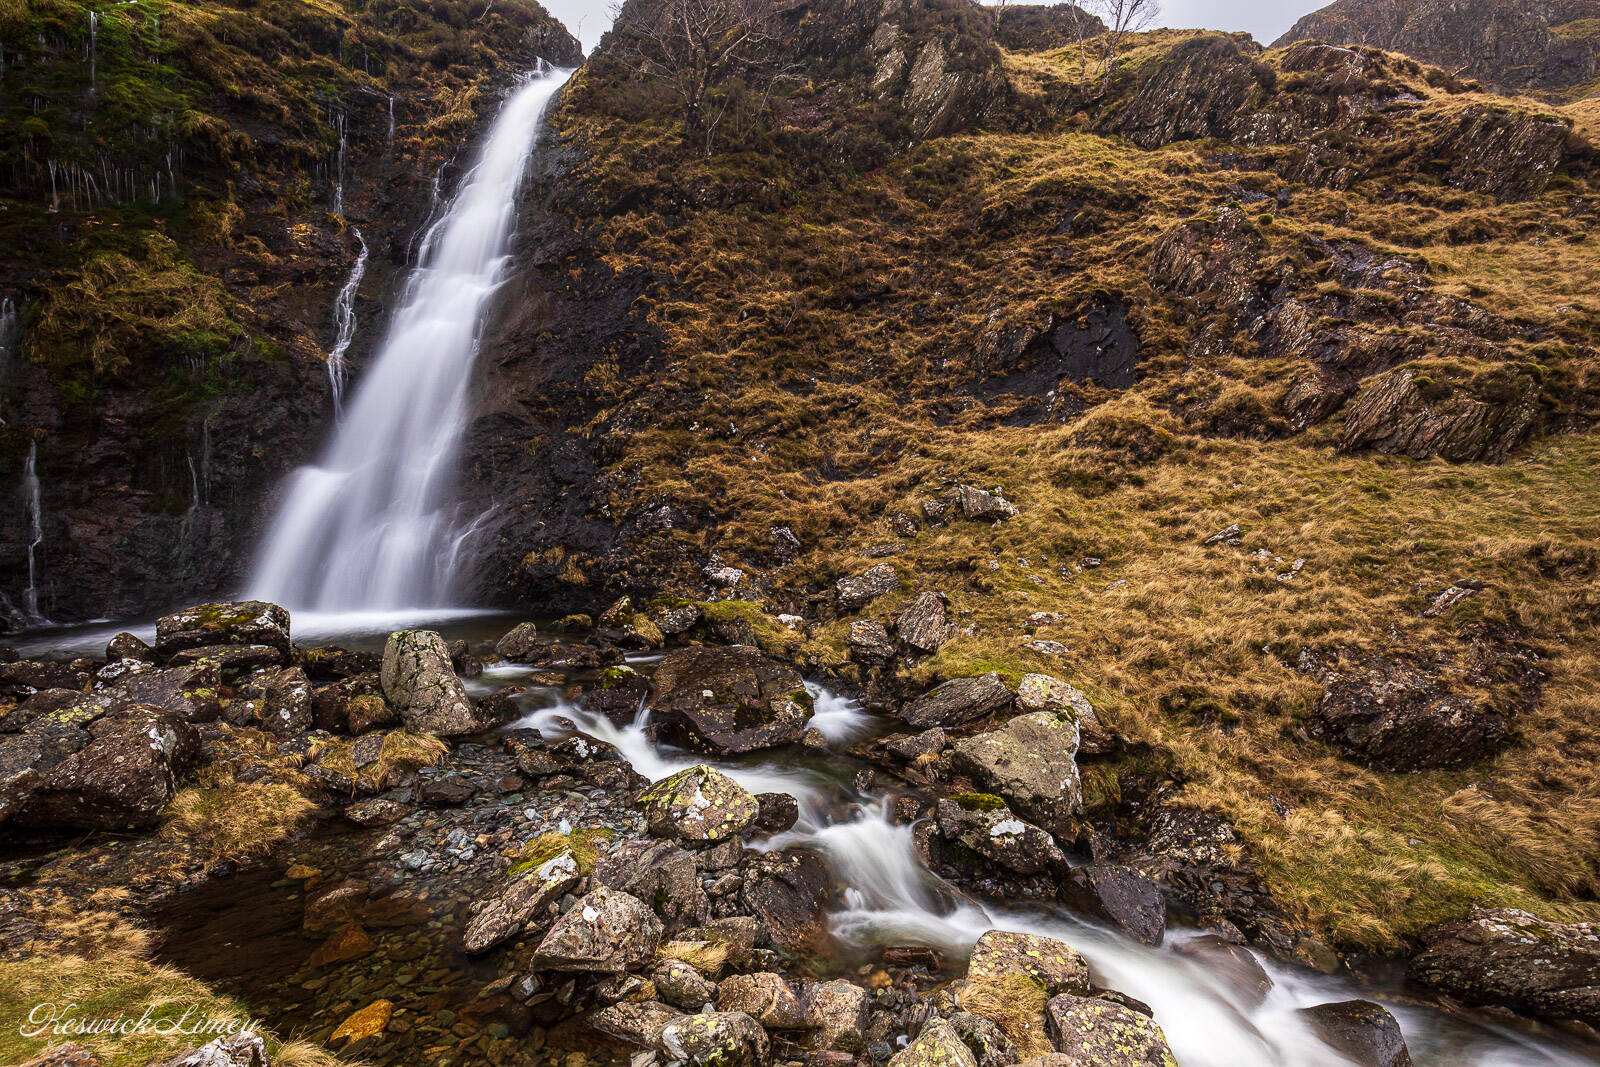 Image of Waterfalls on Newlands Beck by David Leighton